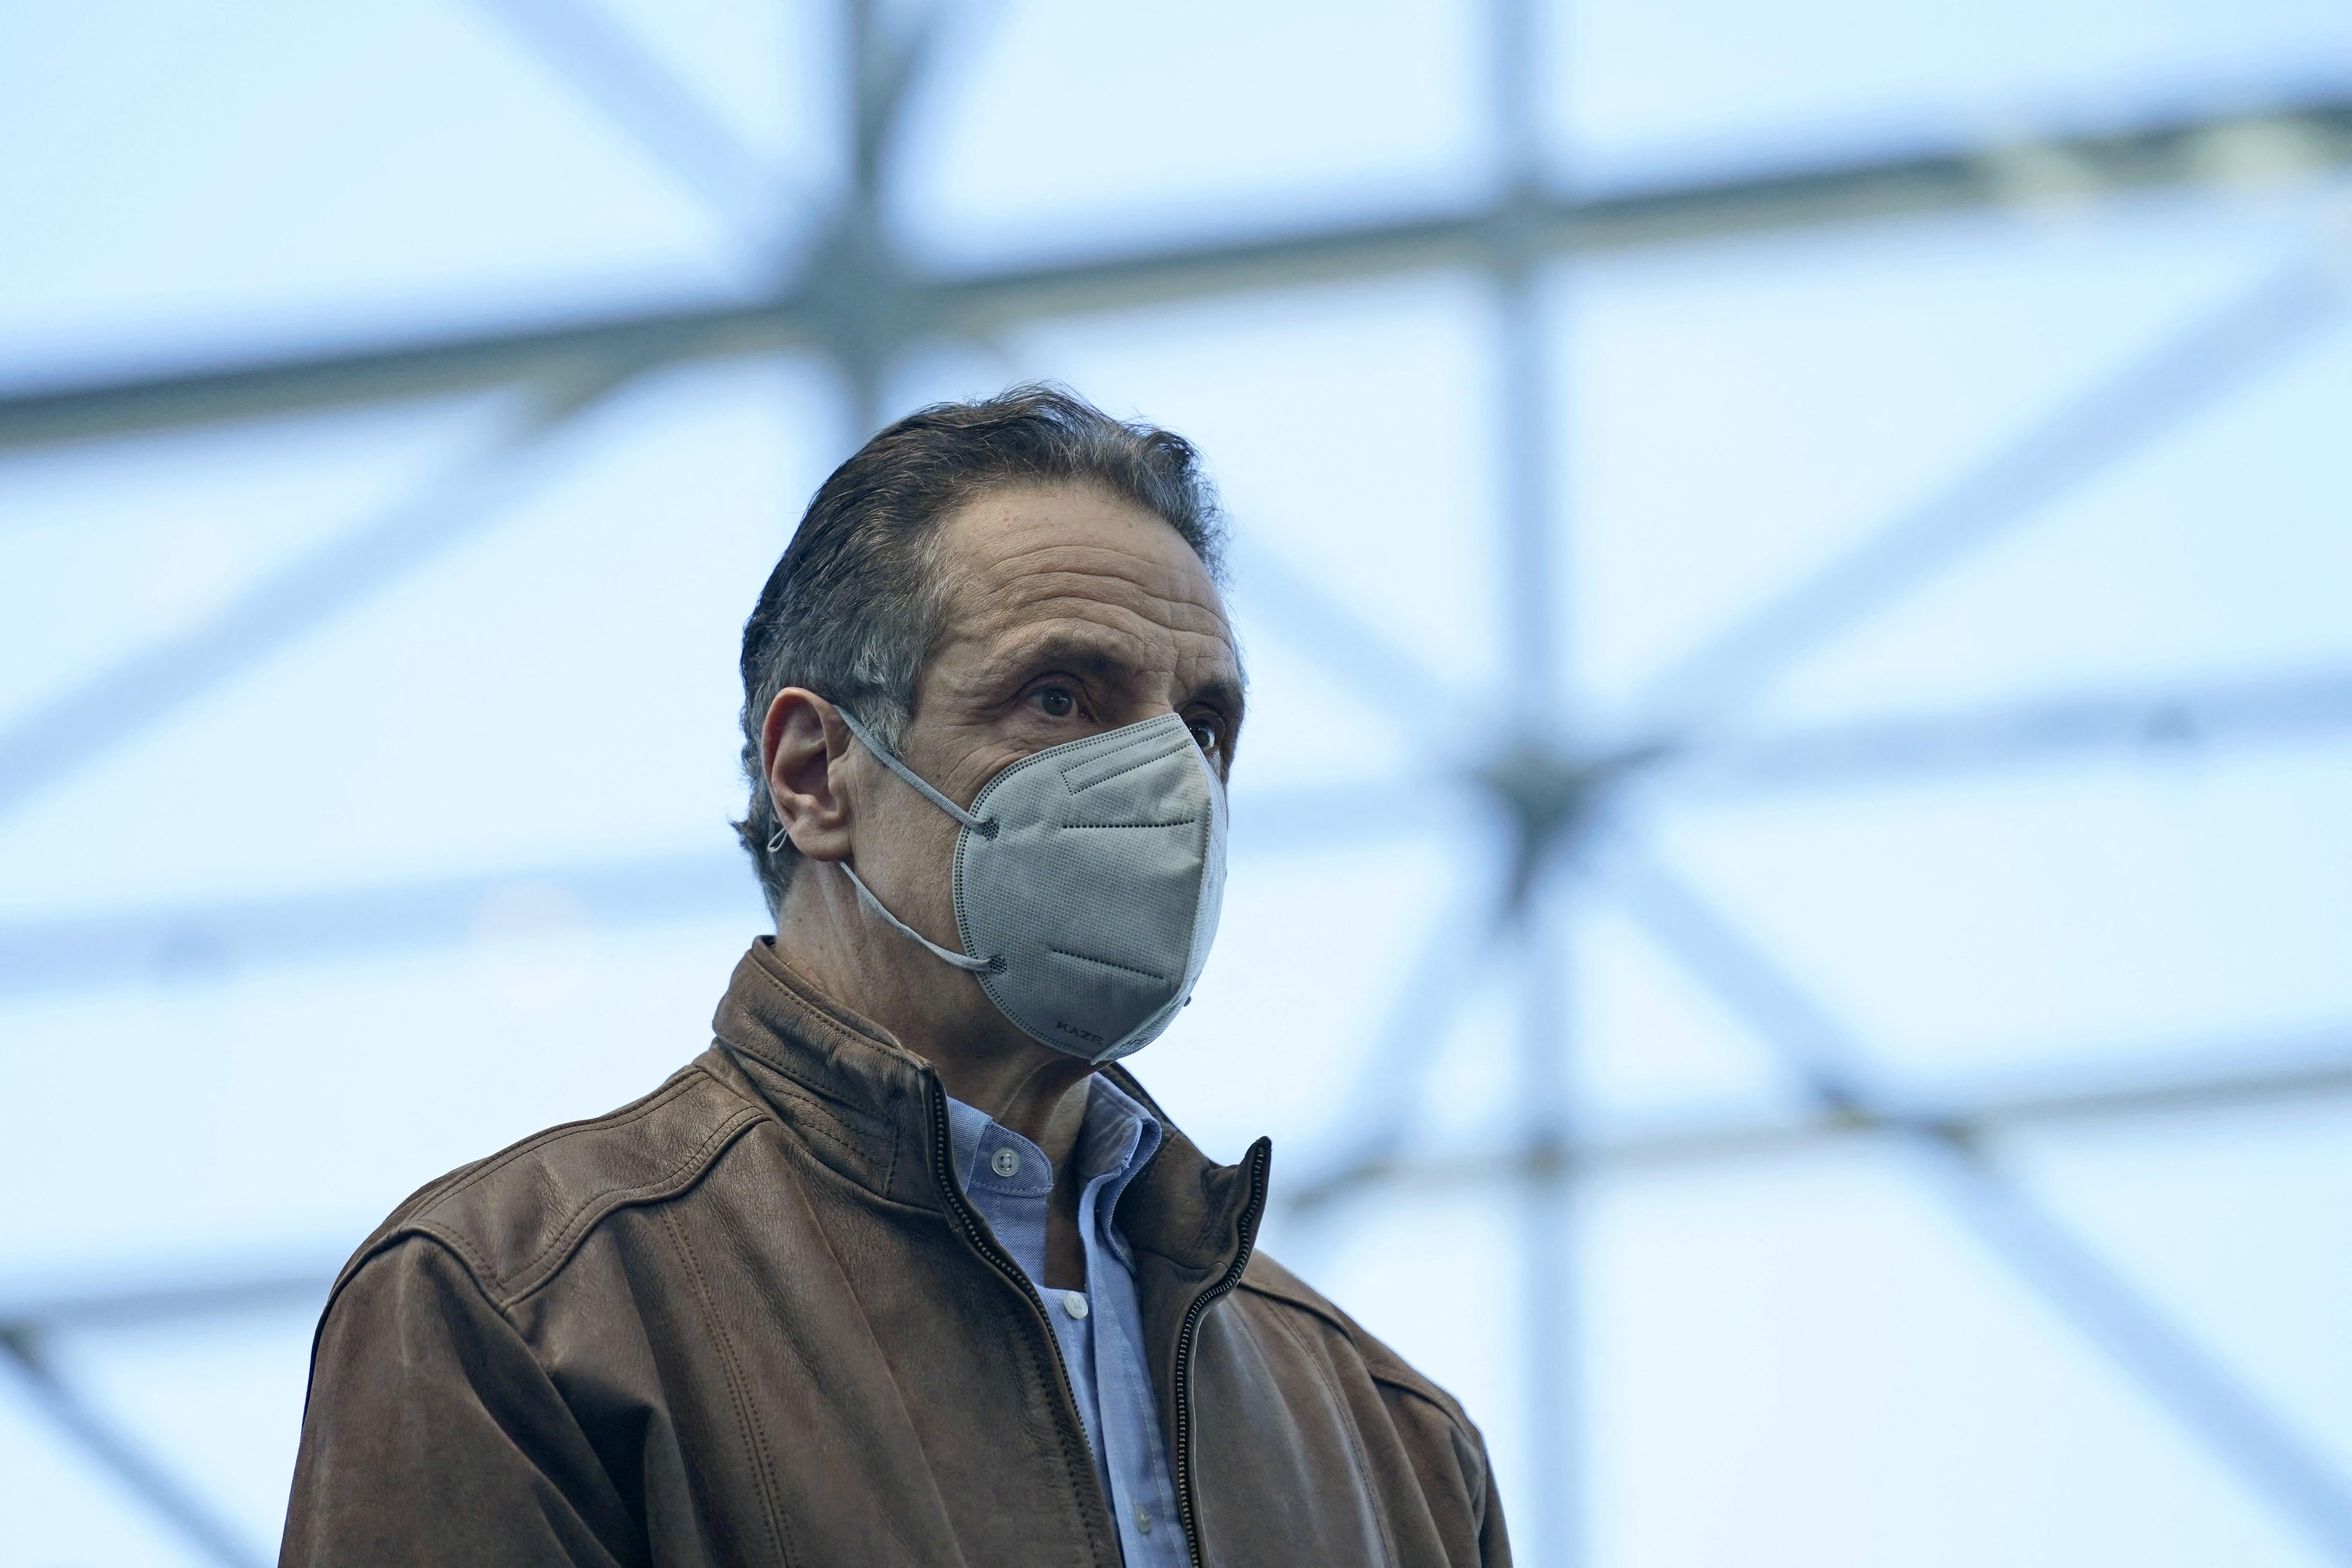 Cuomo stands wearing a gray mask and a brown leather jacket